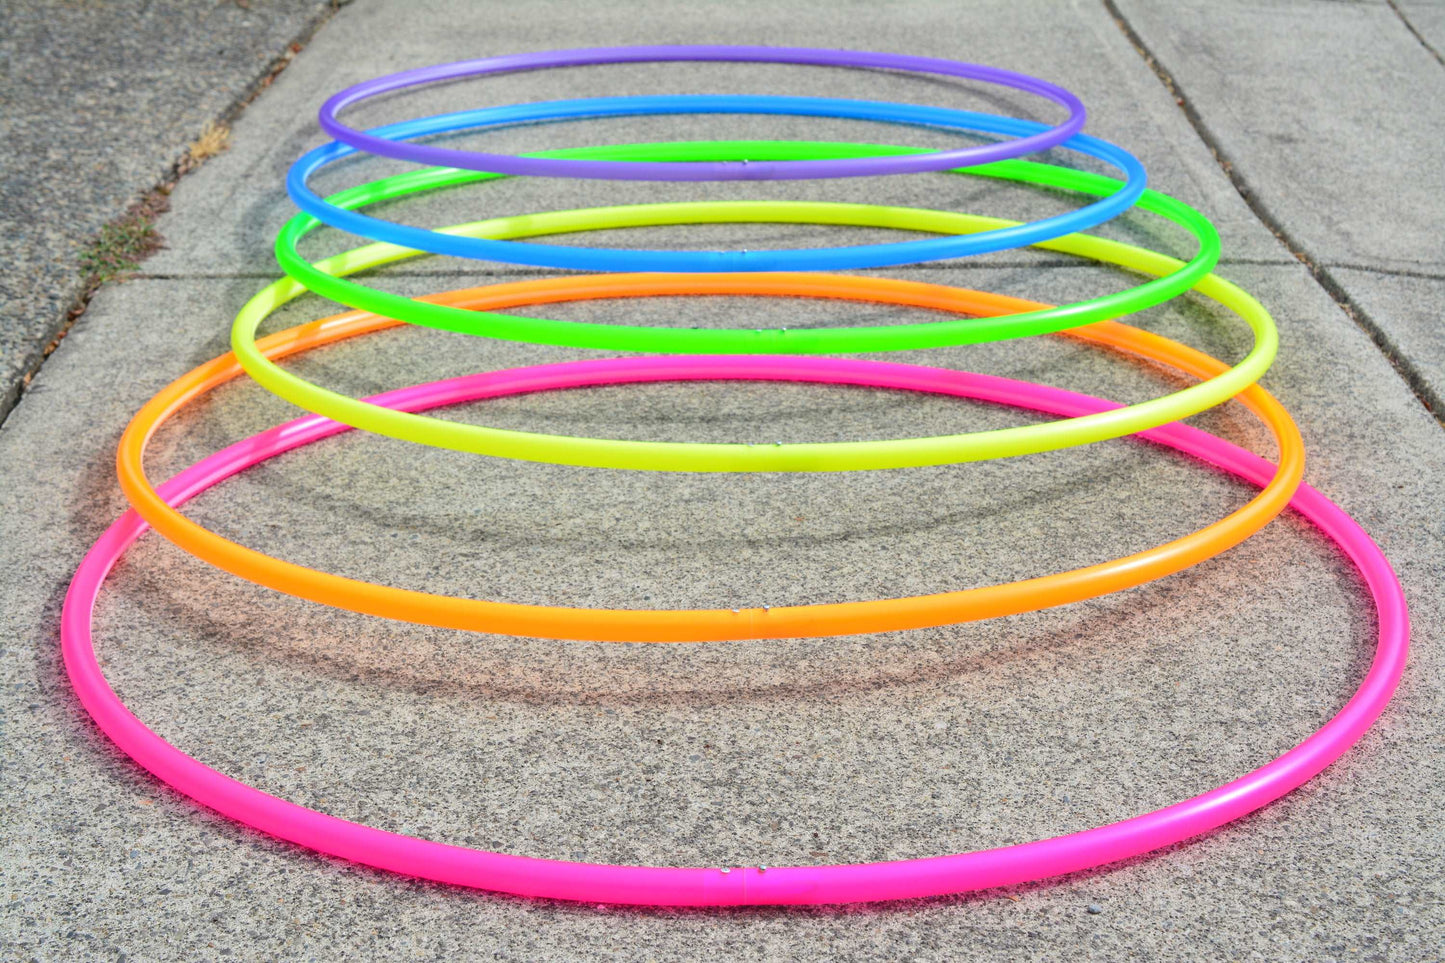 3/4 UV Yellow Colored Polypro Hoops